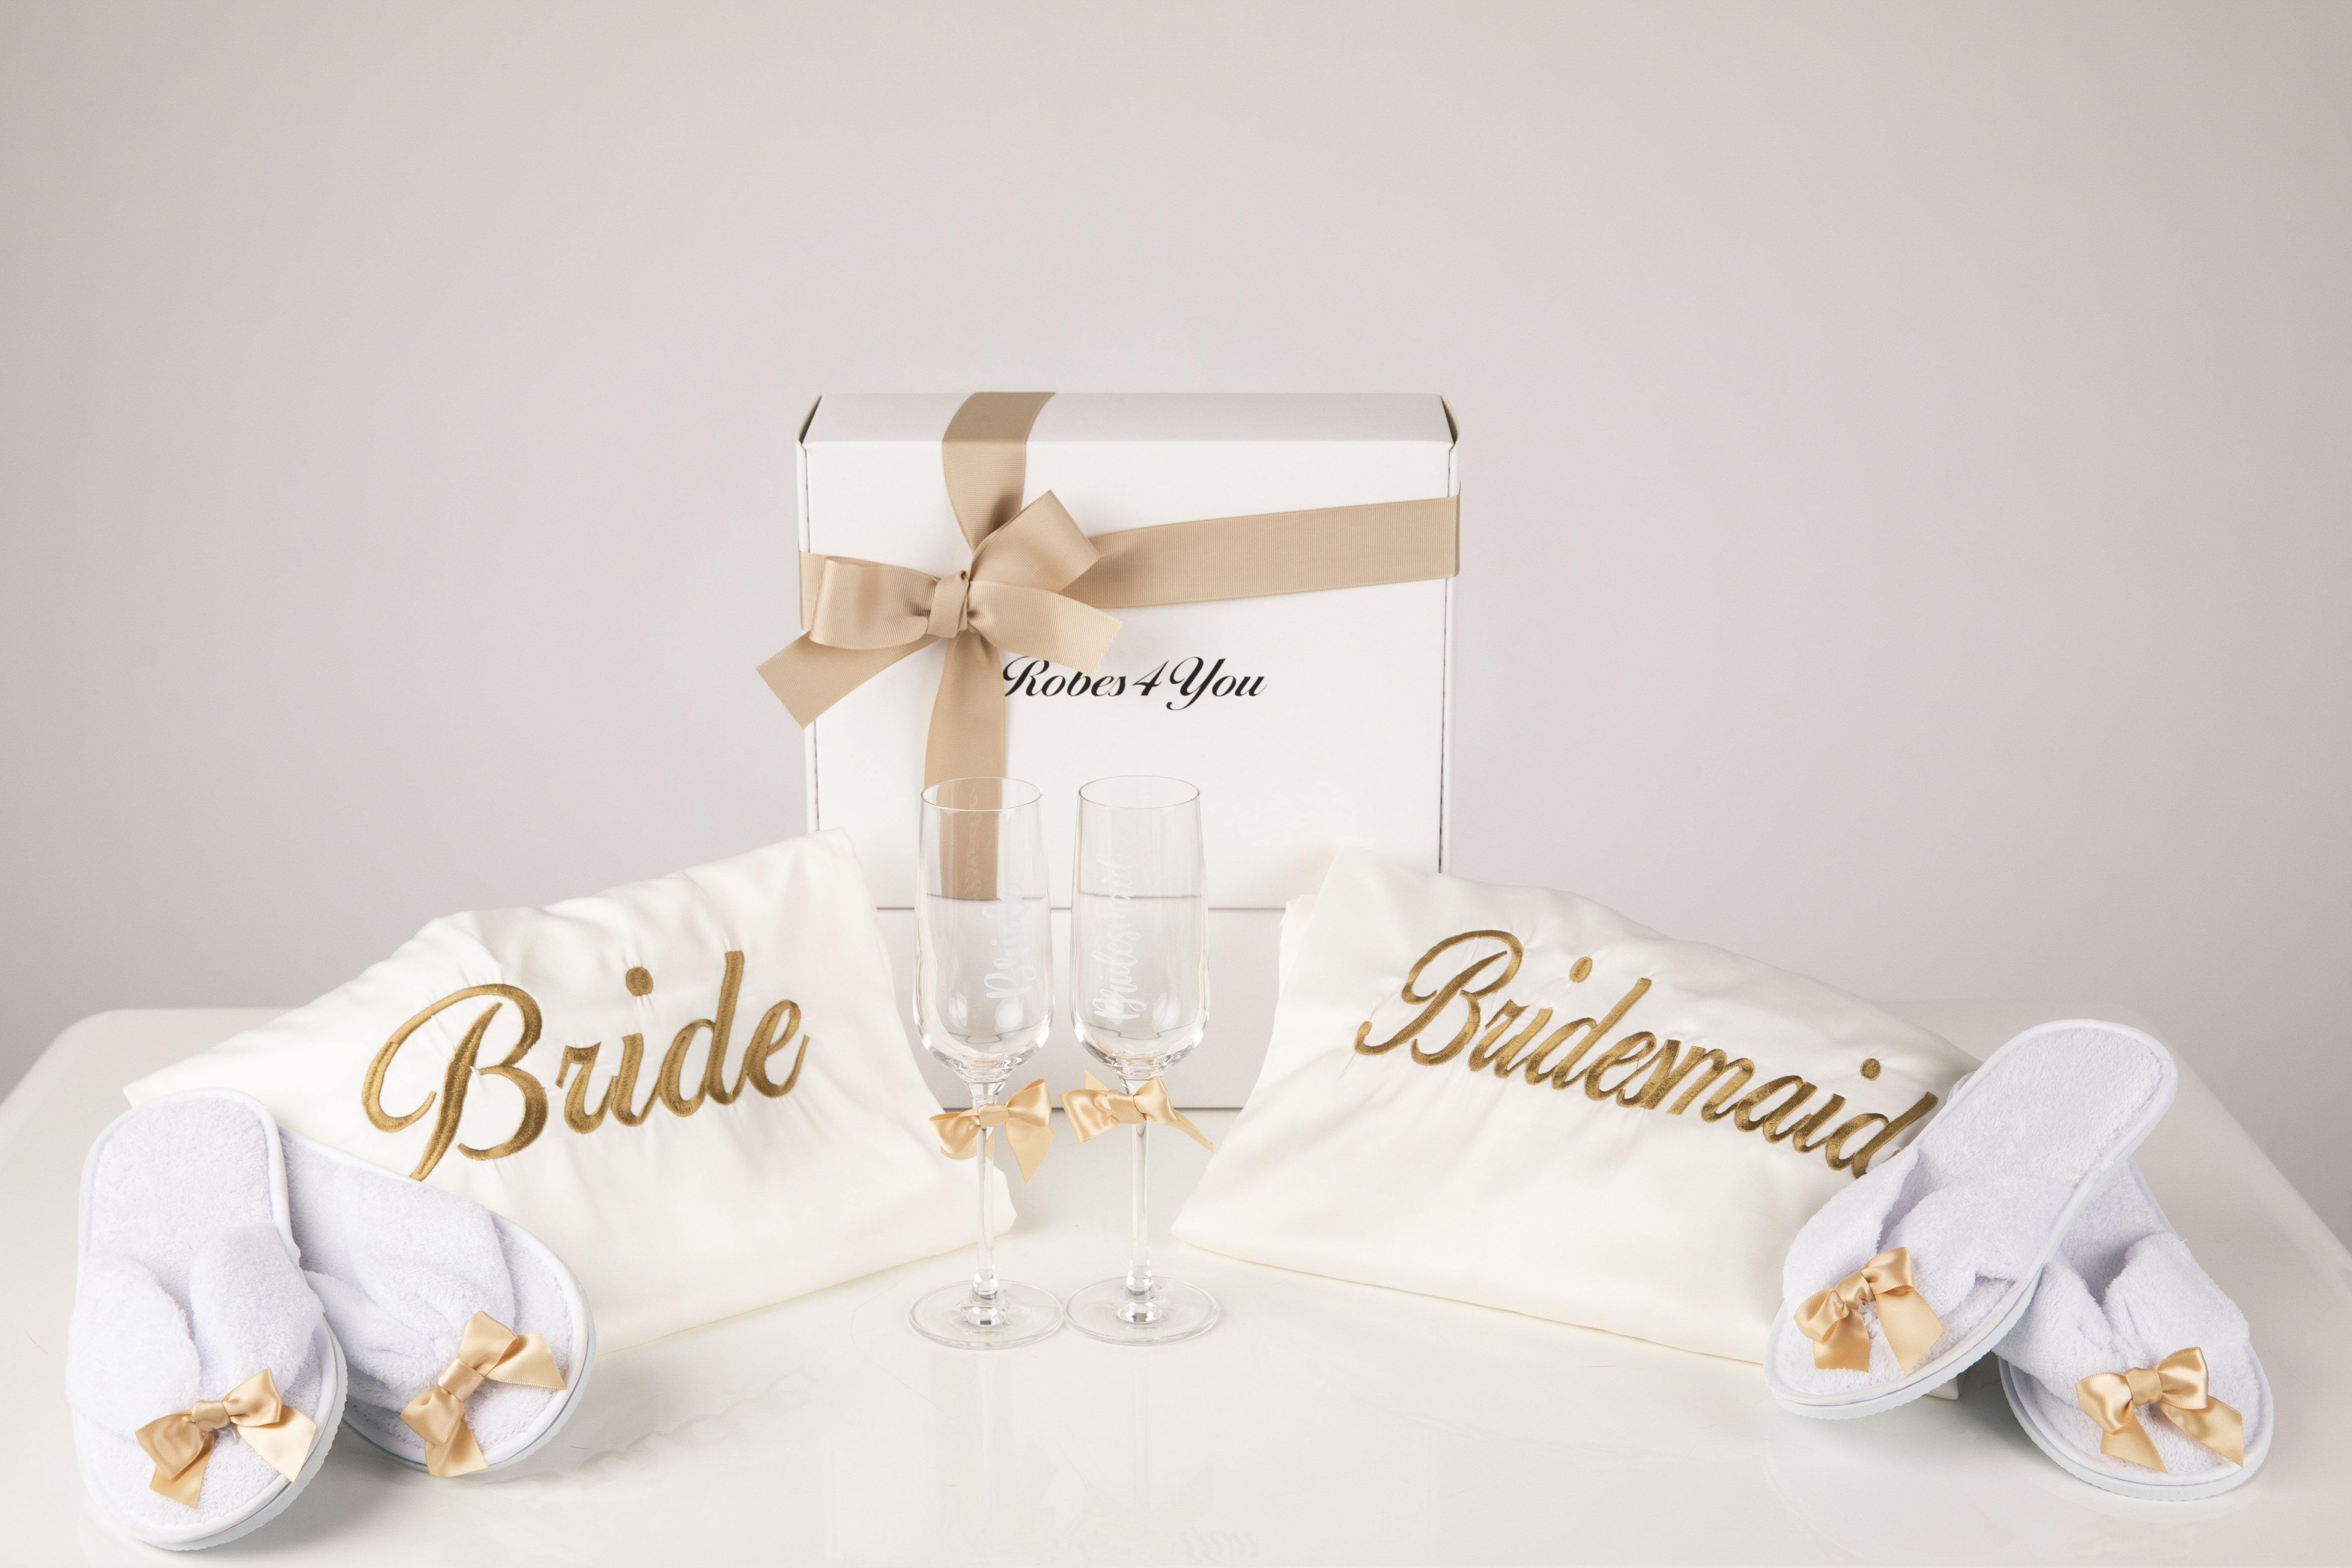 Ivory personalised bridal robes-robes4you